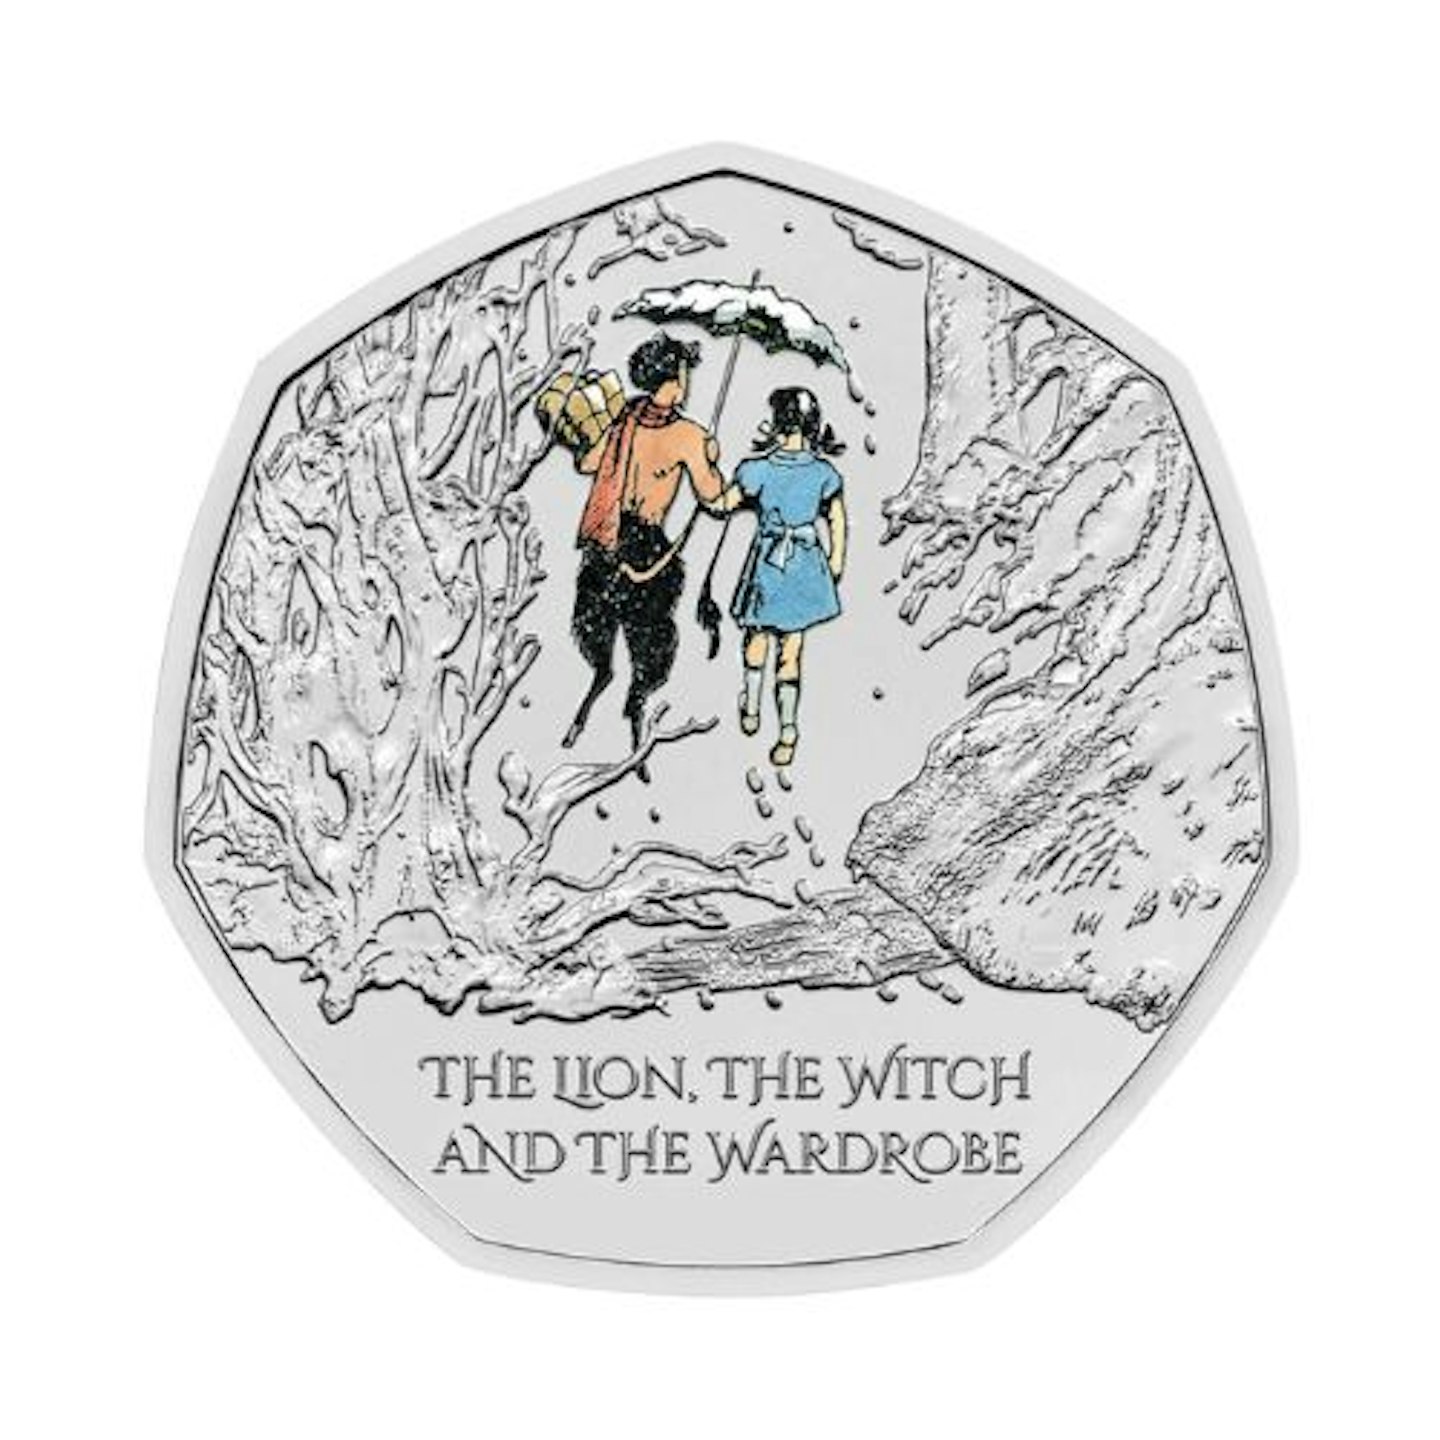 The Lion, the Witch and the Wardrobe 2023 UK 50p Brilliant Uncirculated Colour Coin